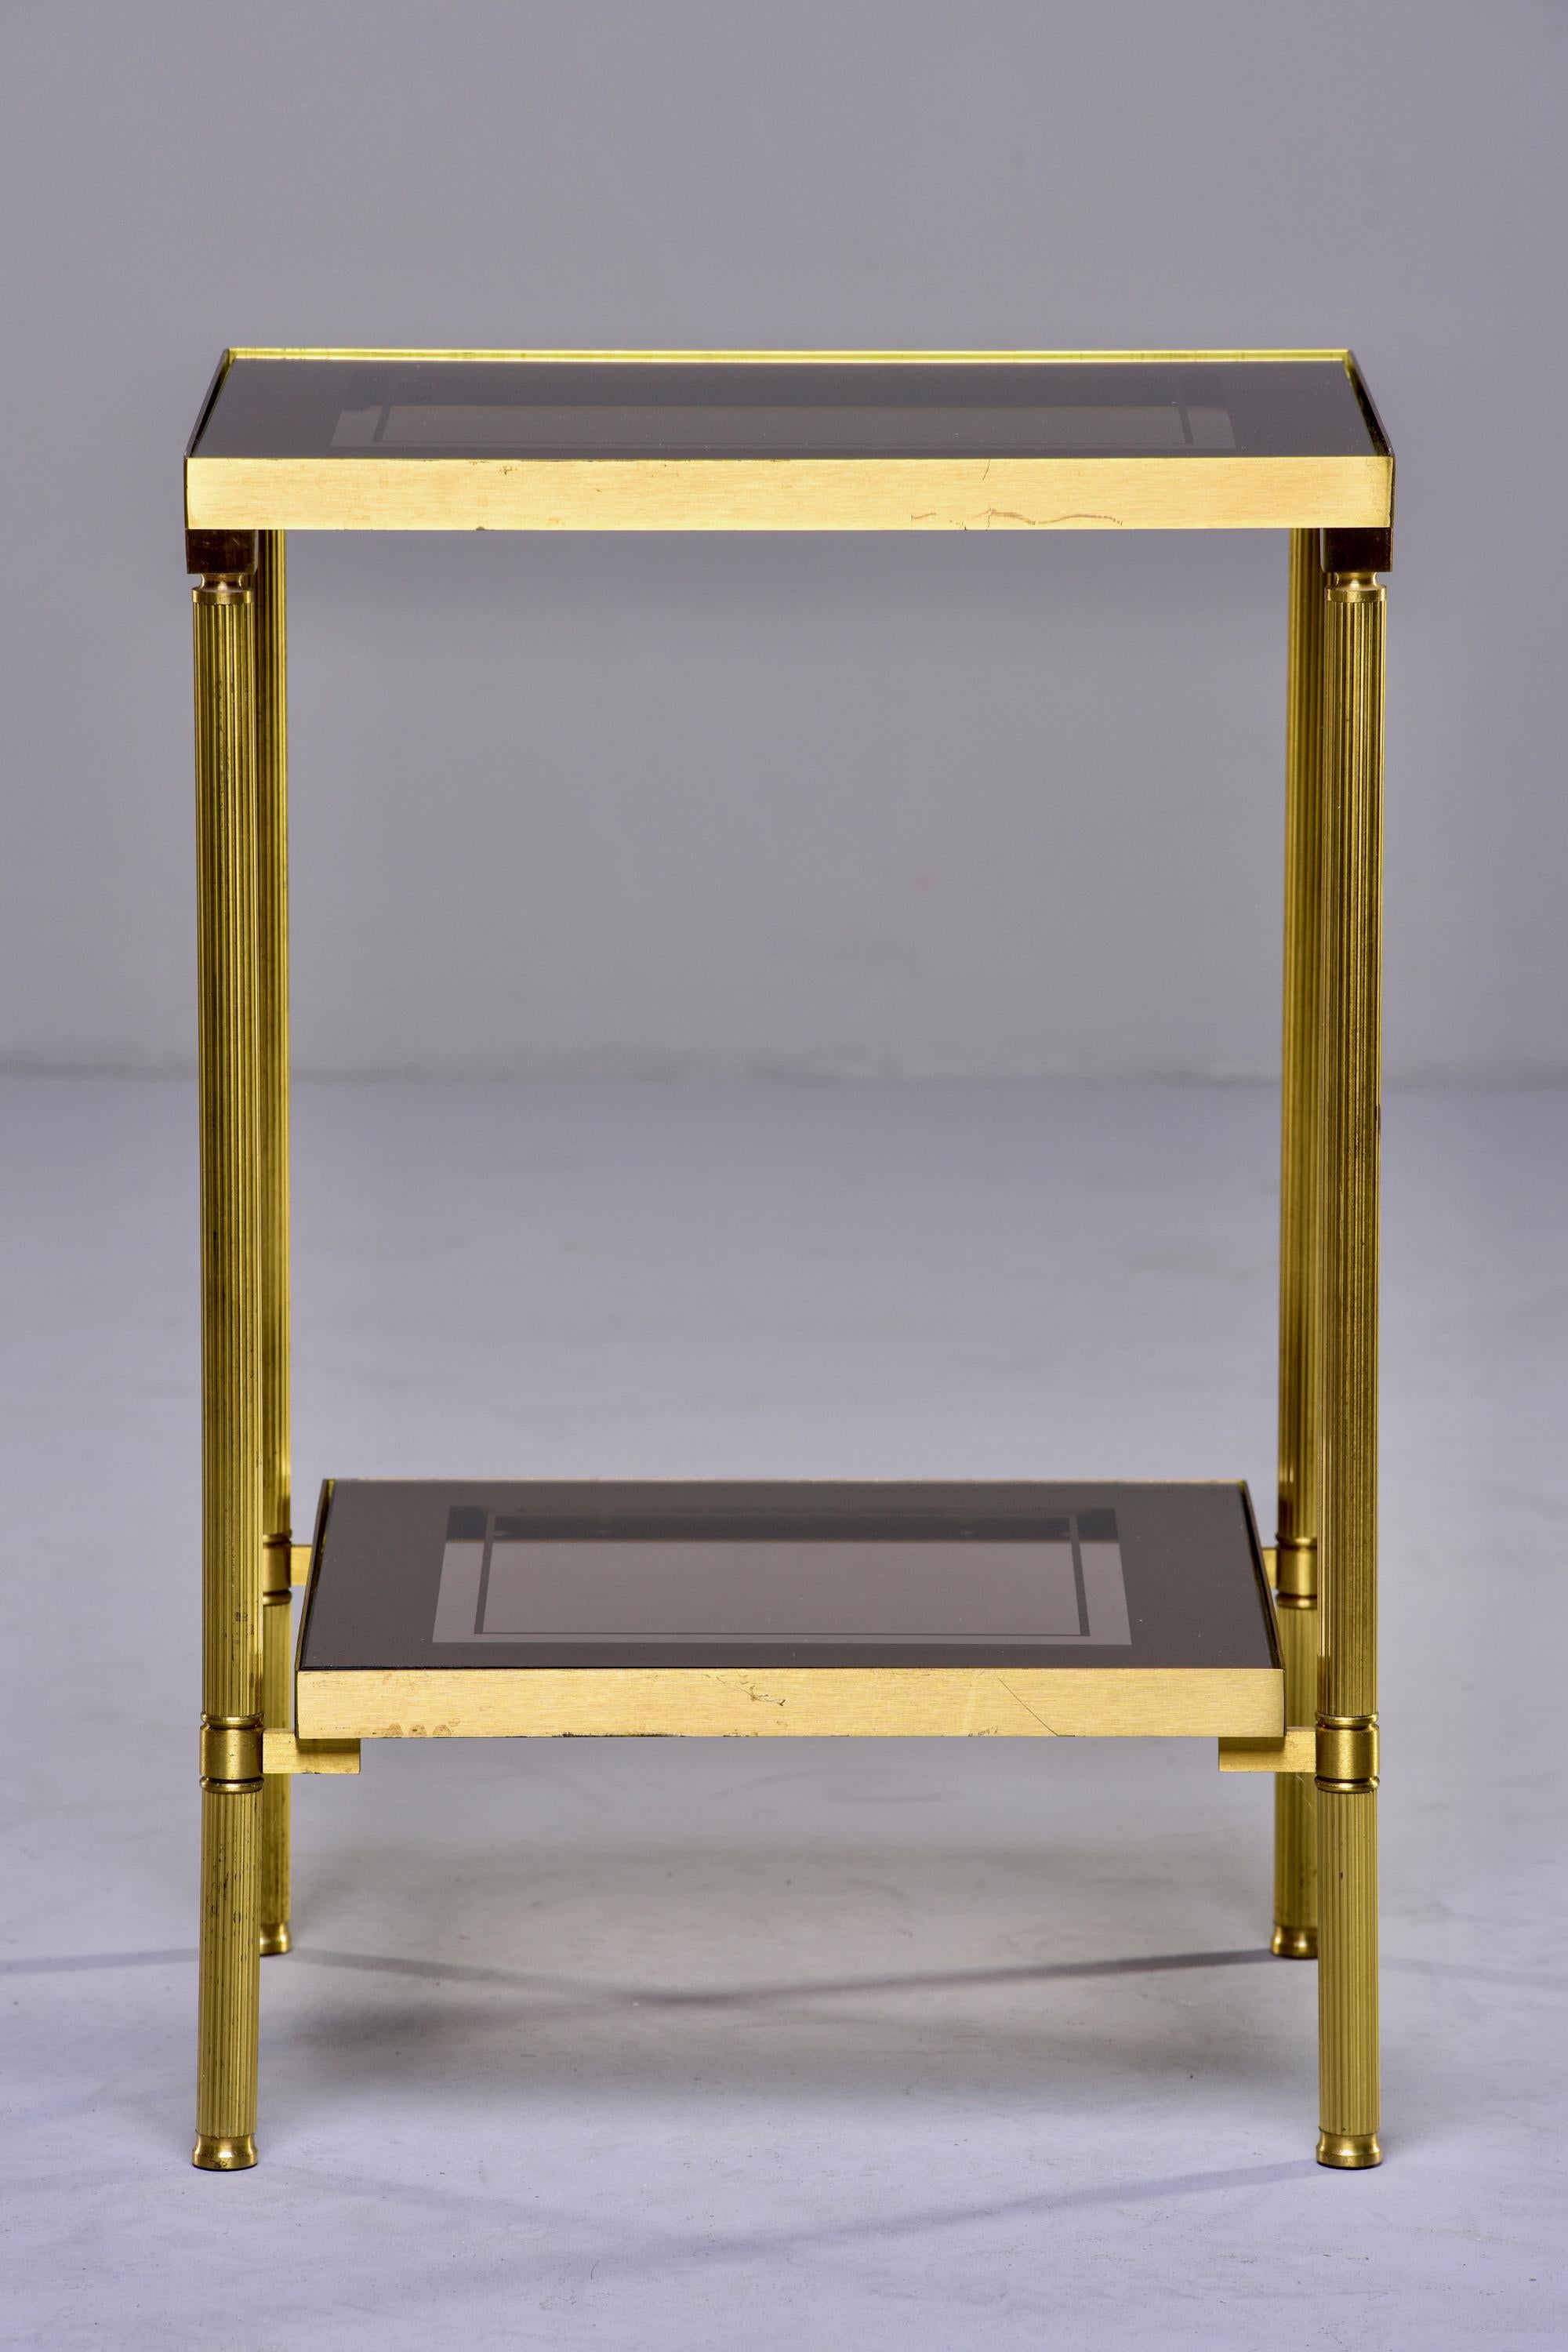 20th Century French Two Tier Side Table with Brass Frame and Glass Tops with Mirrored Borders